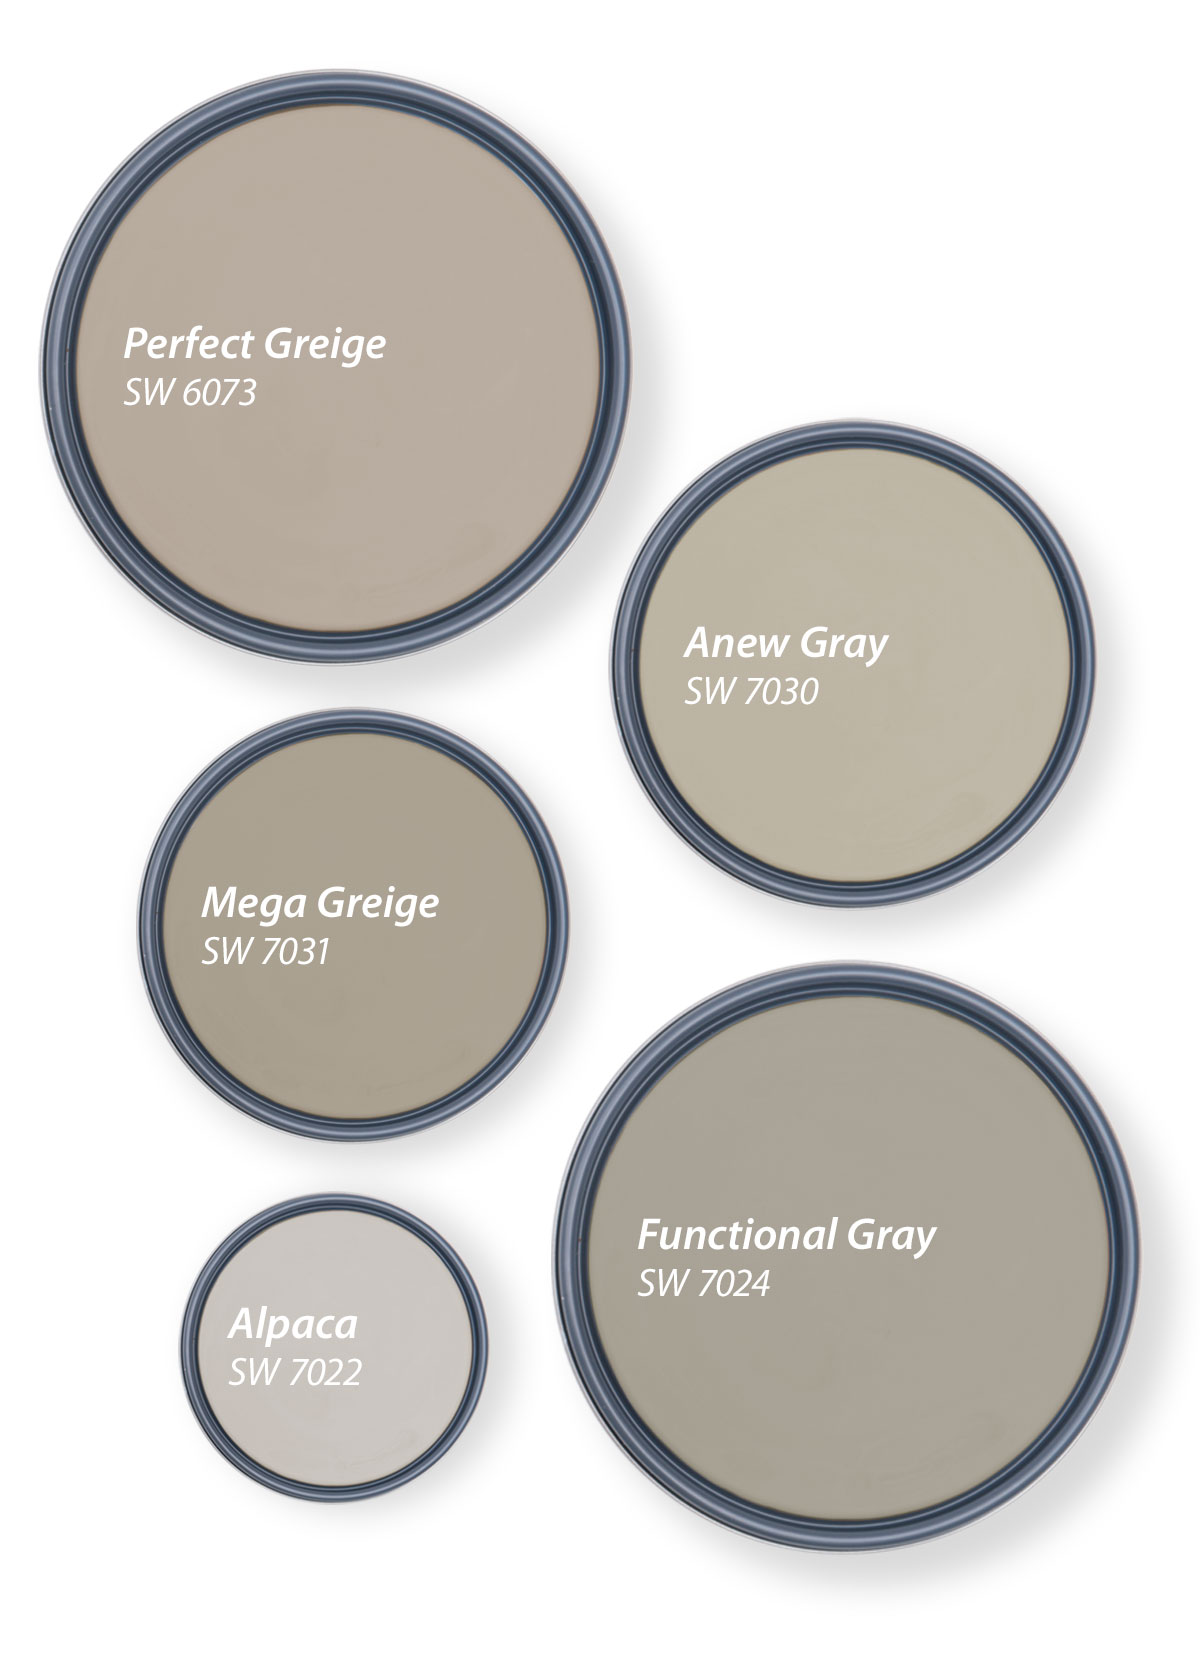 Sherwin Williams Top 5 Shades of Greige